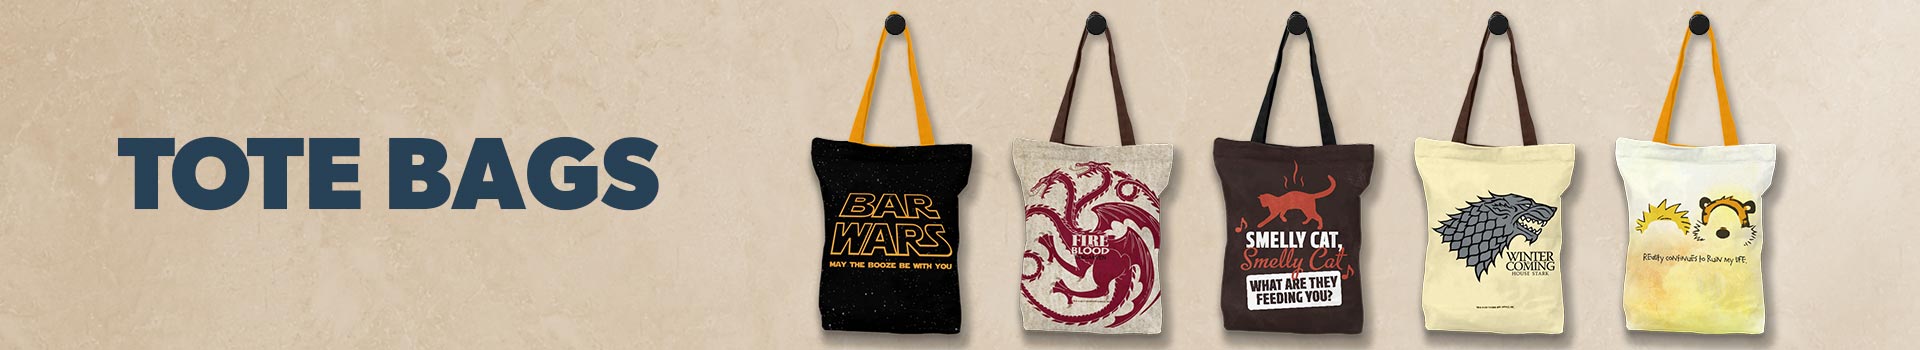 Category Banner - Tote Bags